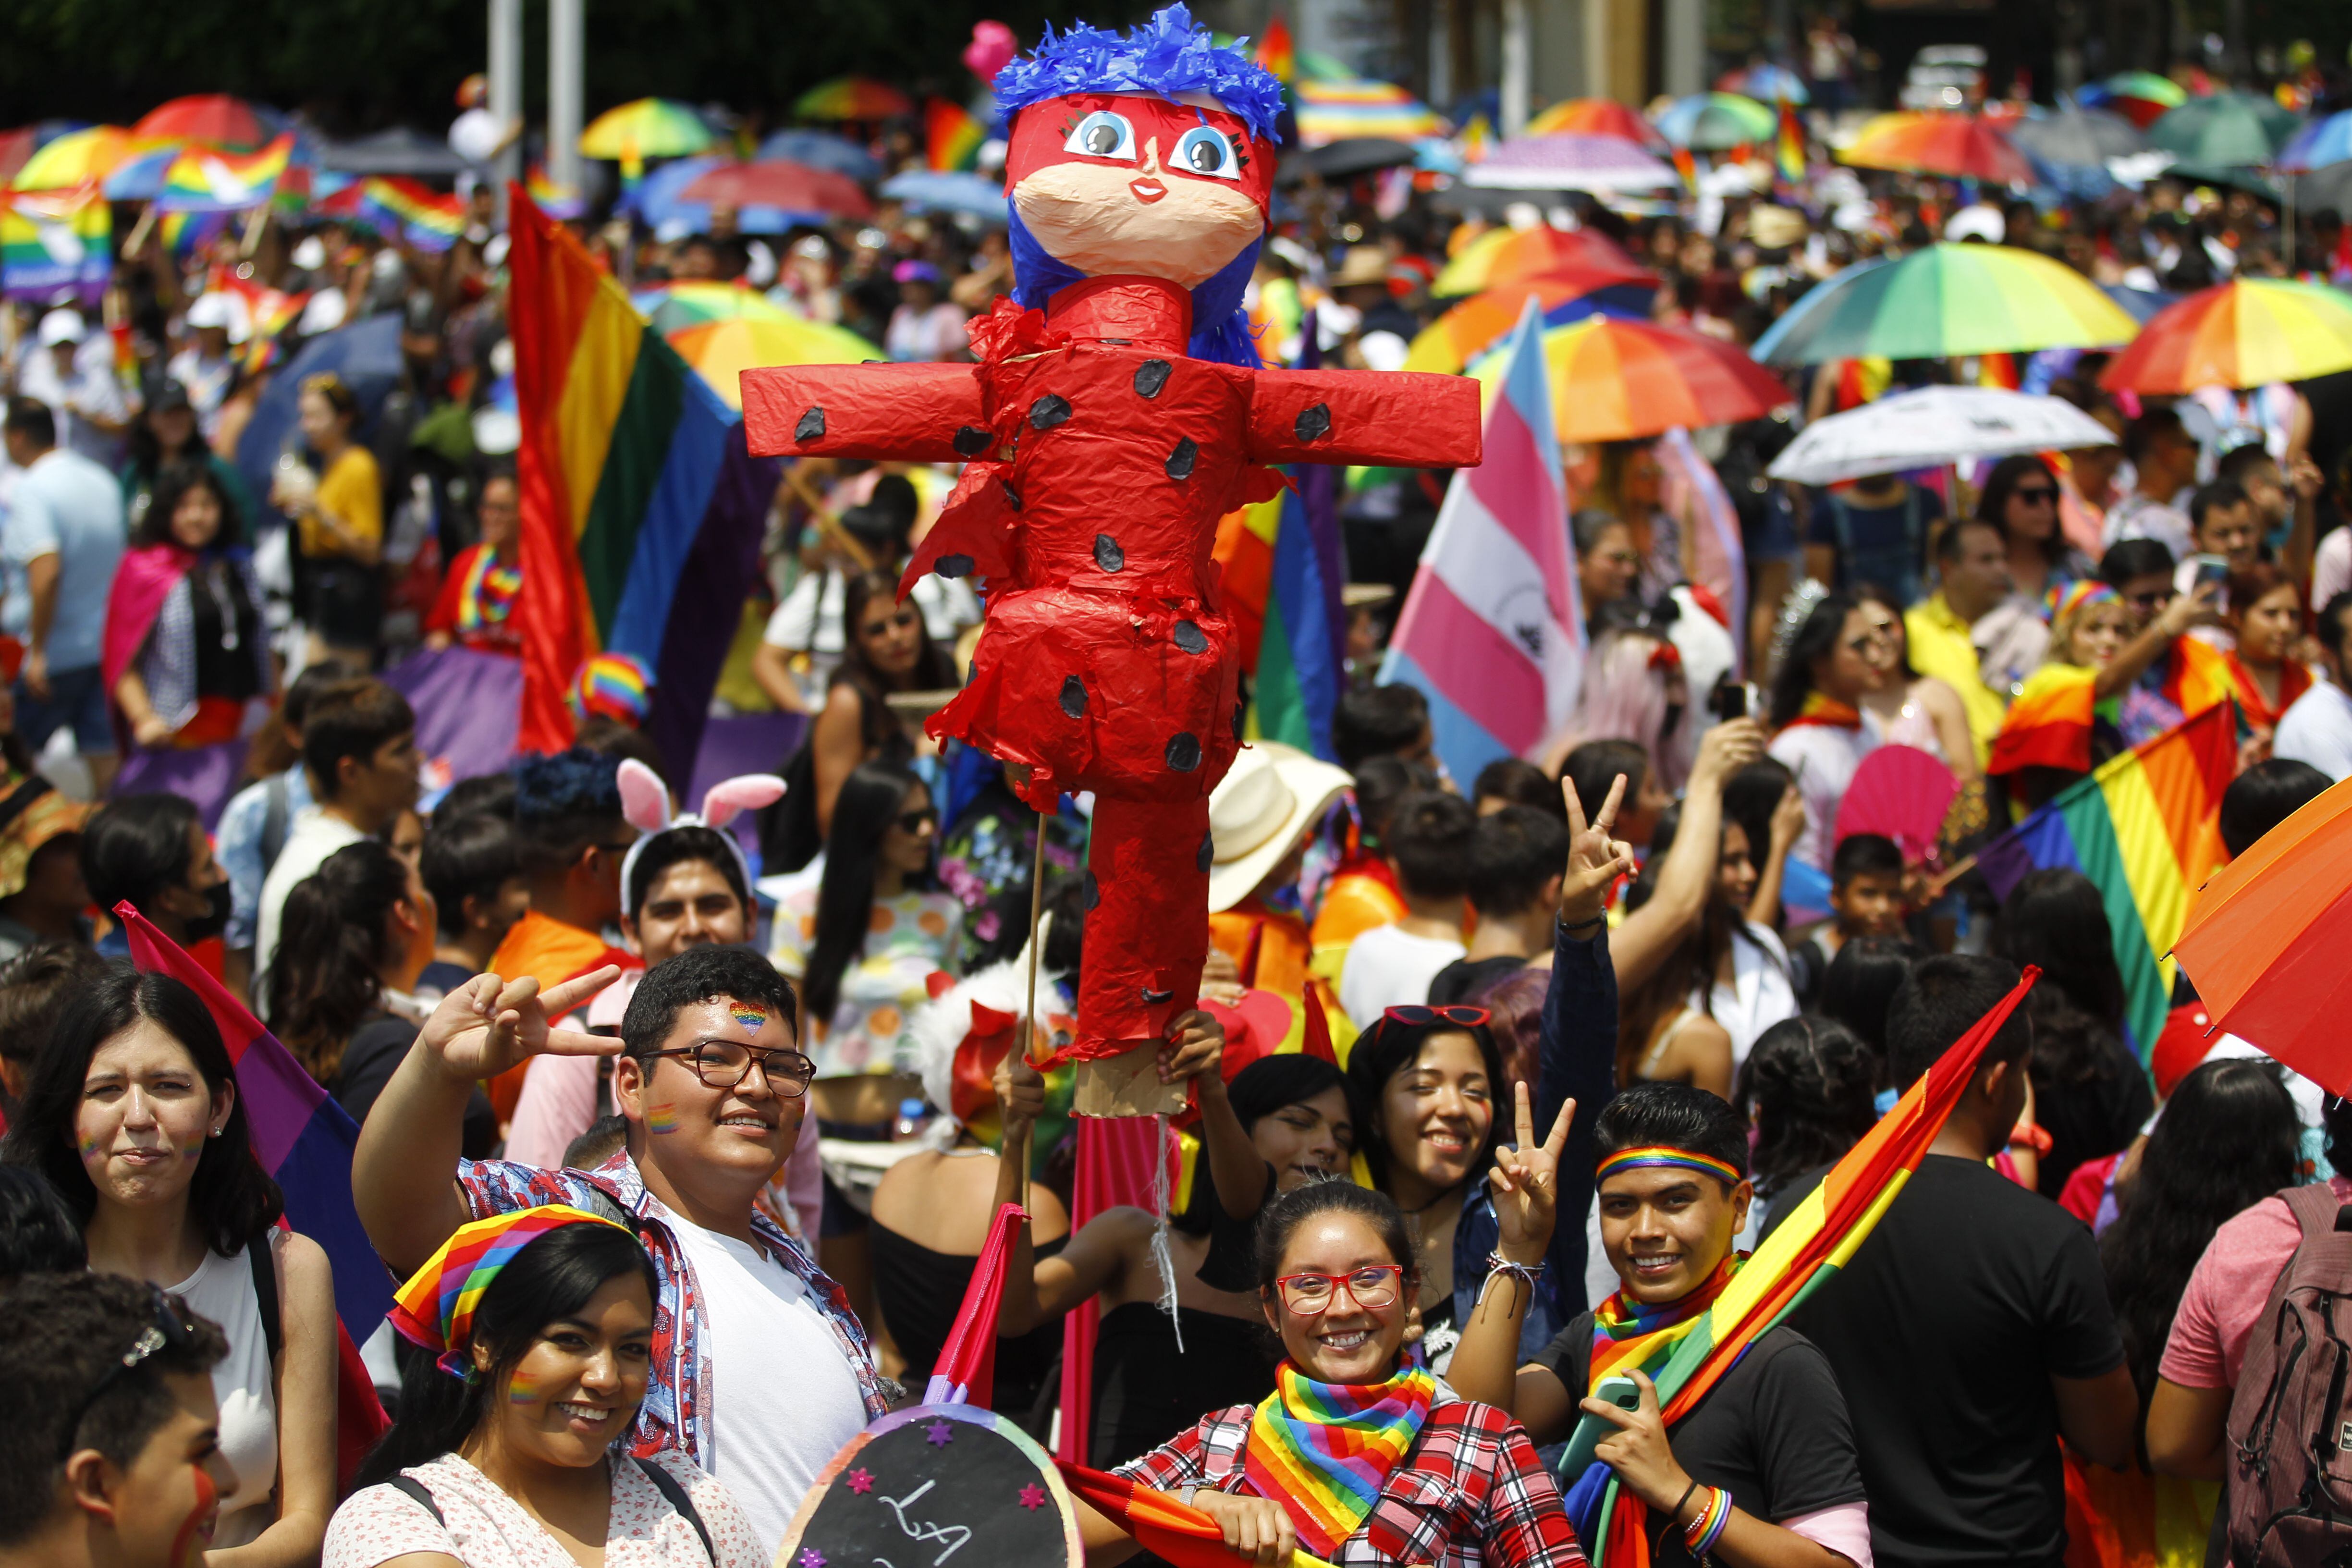 The Mexican LGBT community celebrated its pride march demanding recognition of their rights, such as access to health, non-violence and equal treatment.